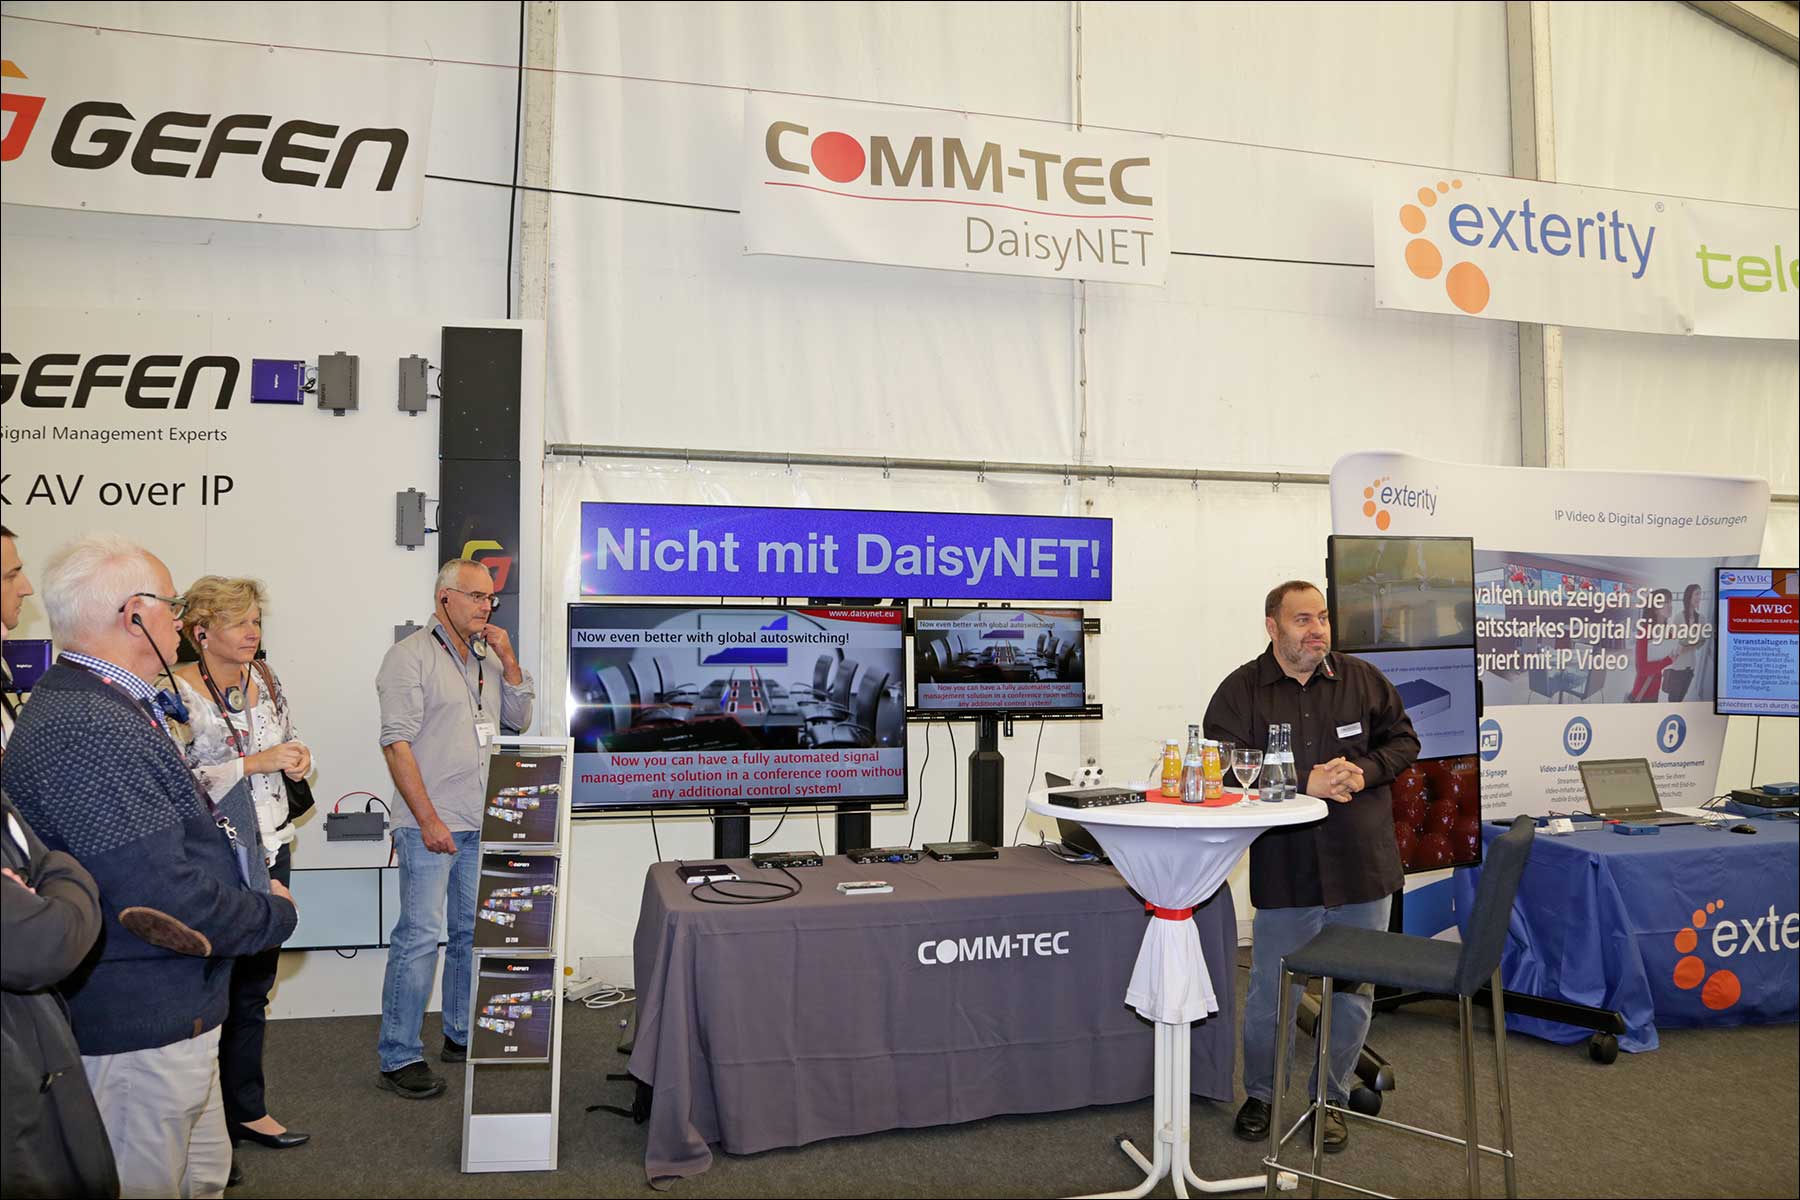 COMM-TEC S14 Solutions Day 2018